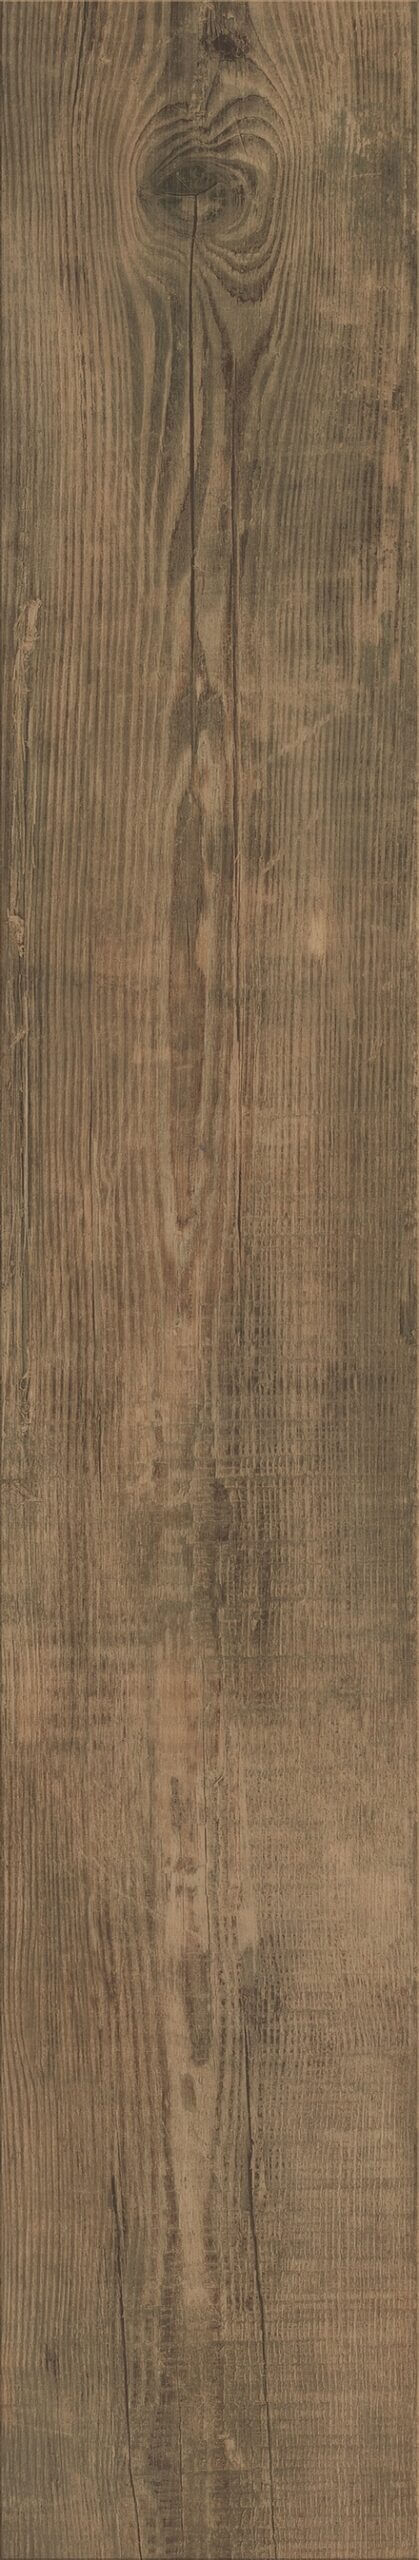 NATURAL SAWN -luvanto click flooring -02-scaled